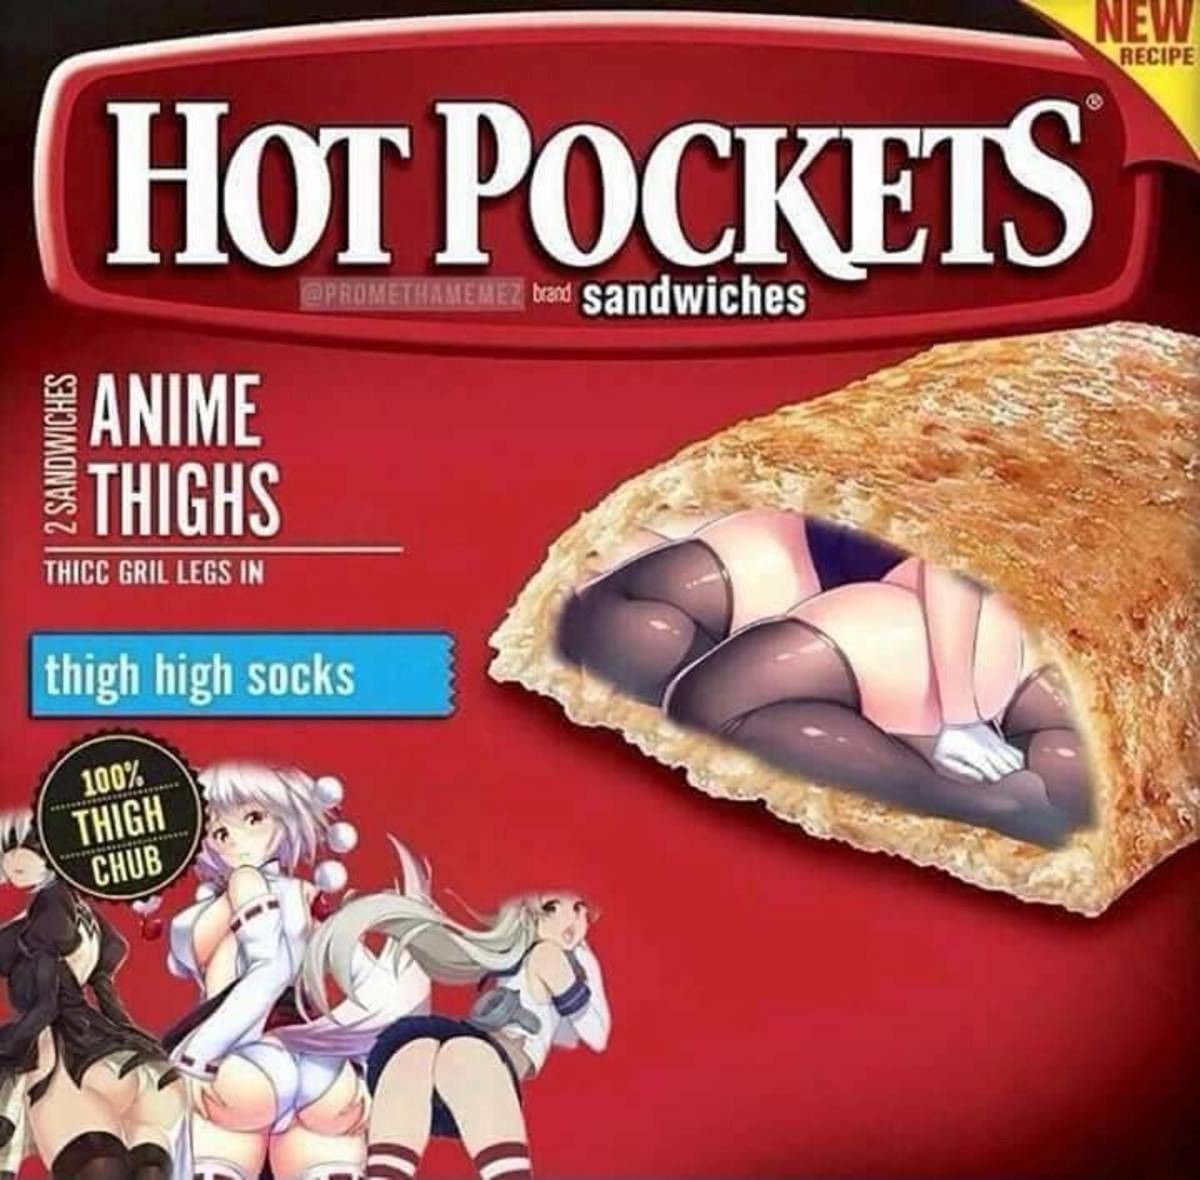 What is a thot pocket